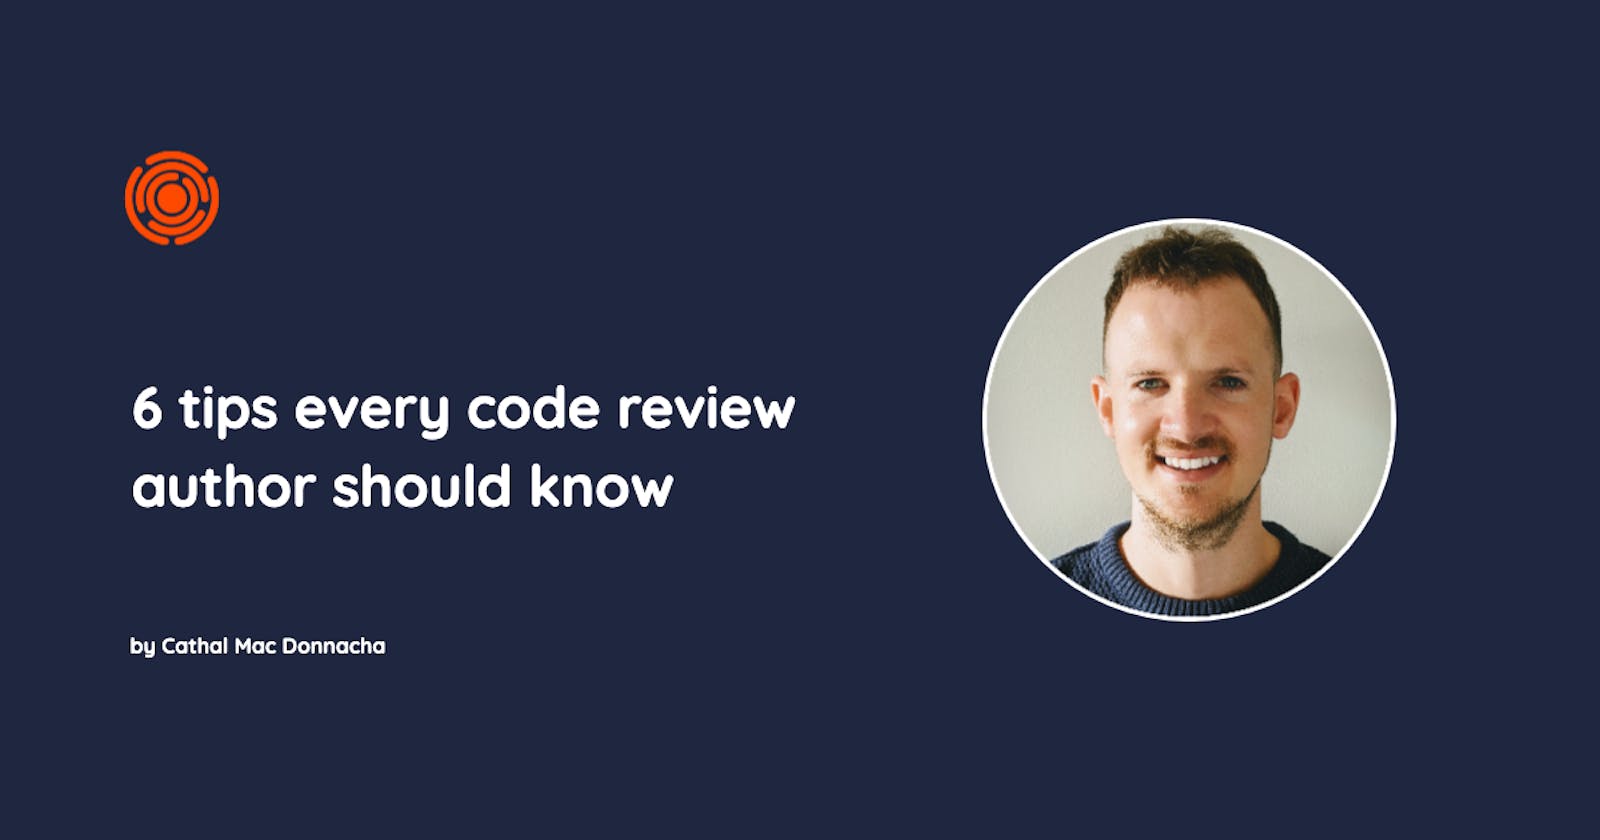 6 tips every code review author should know